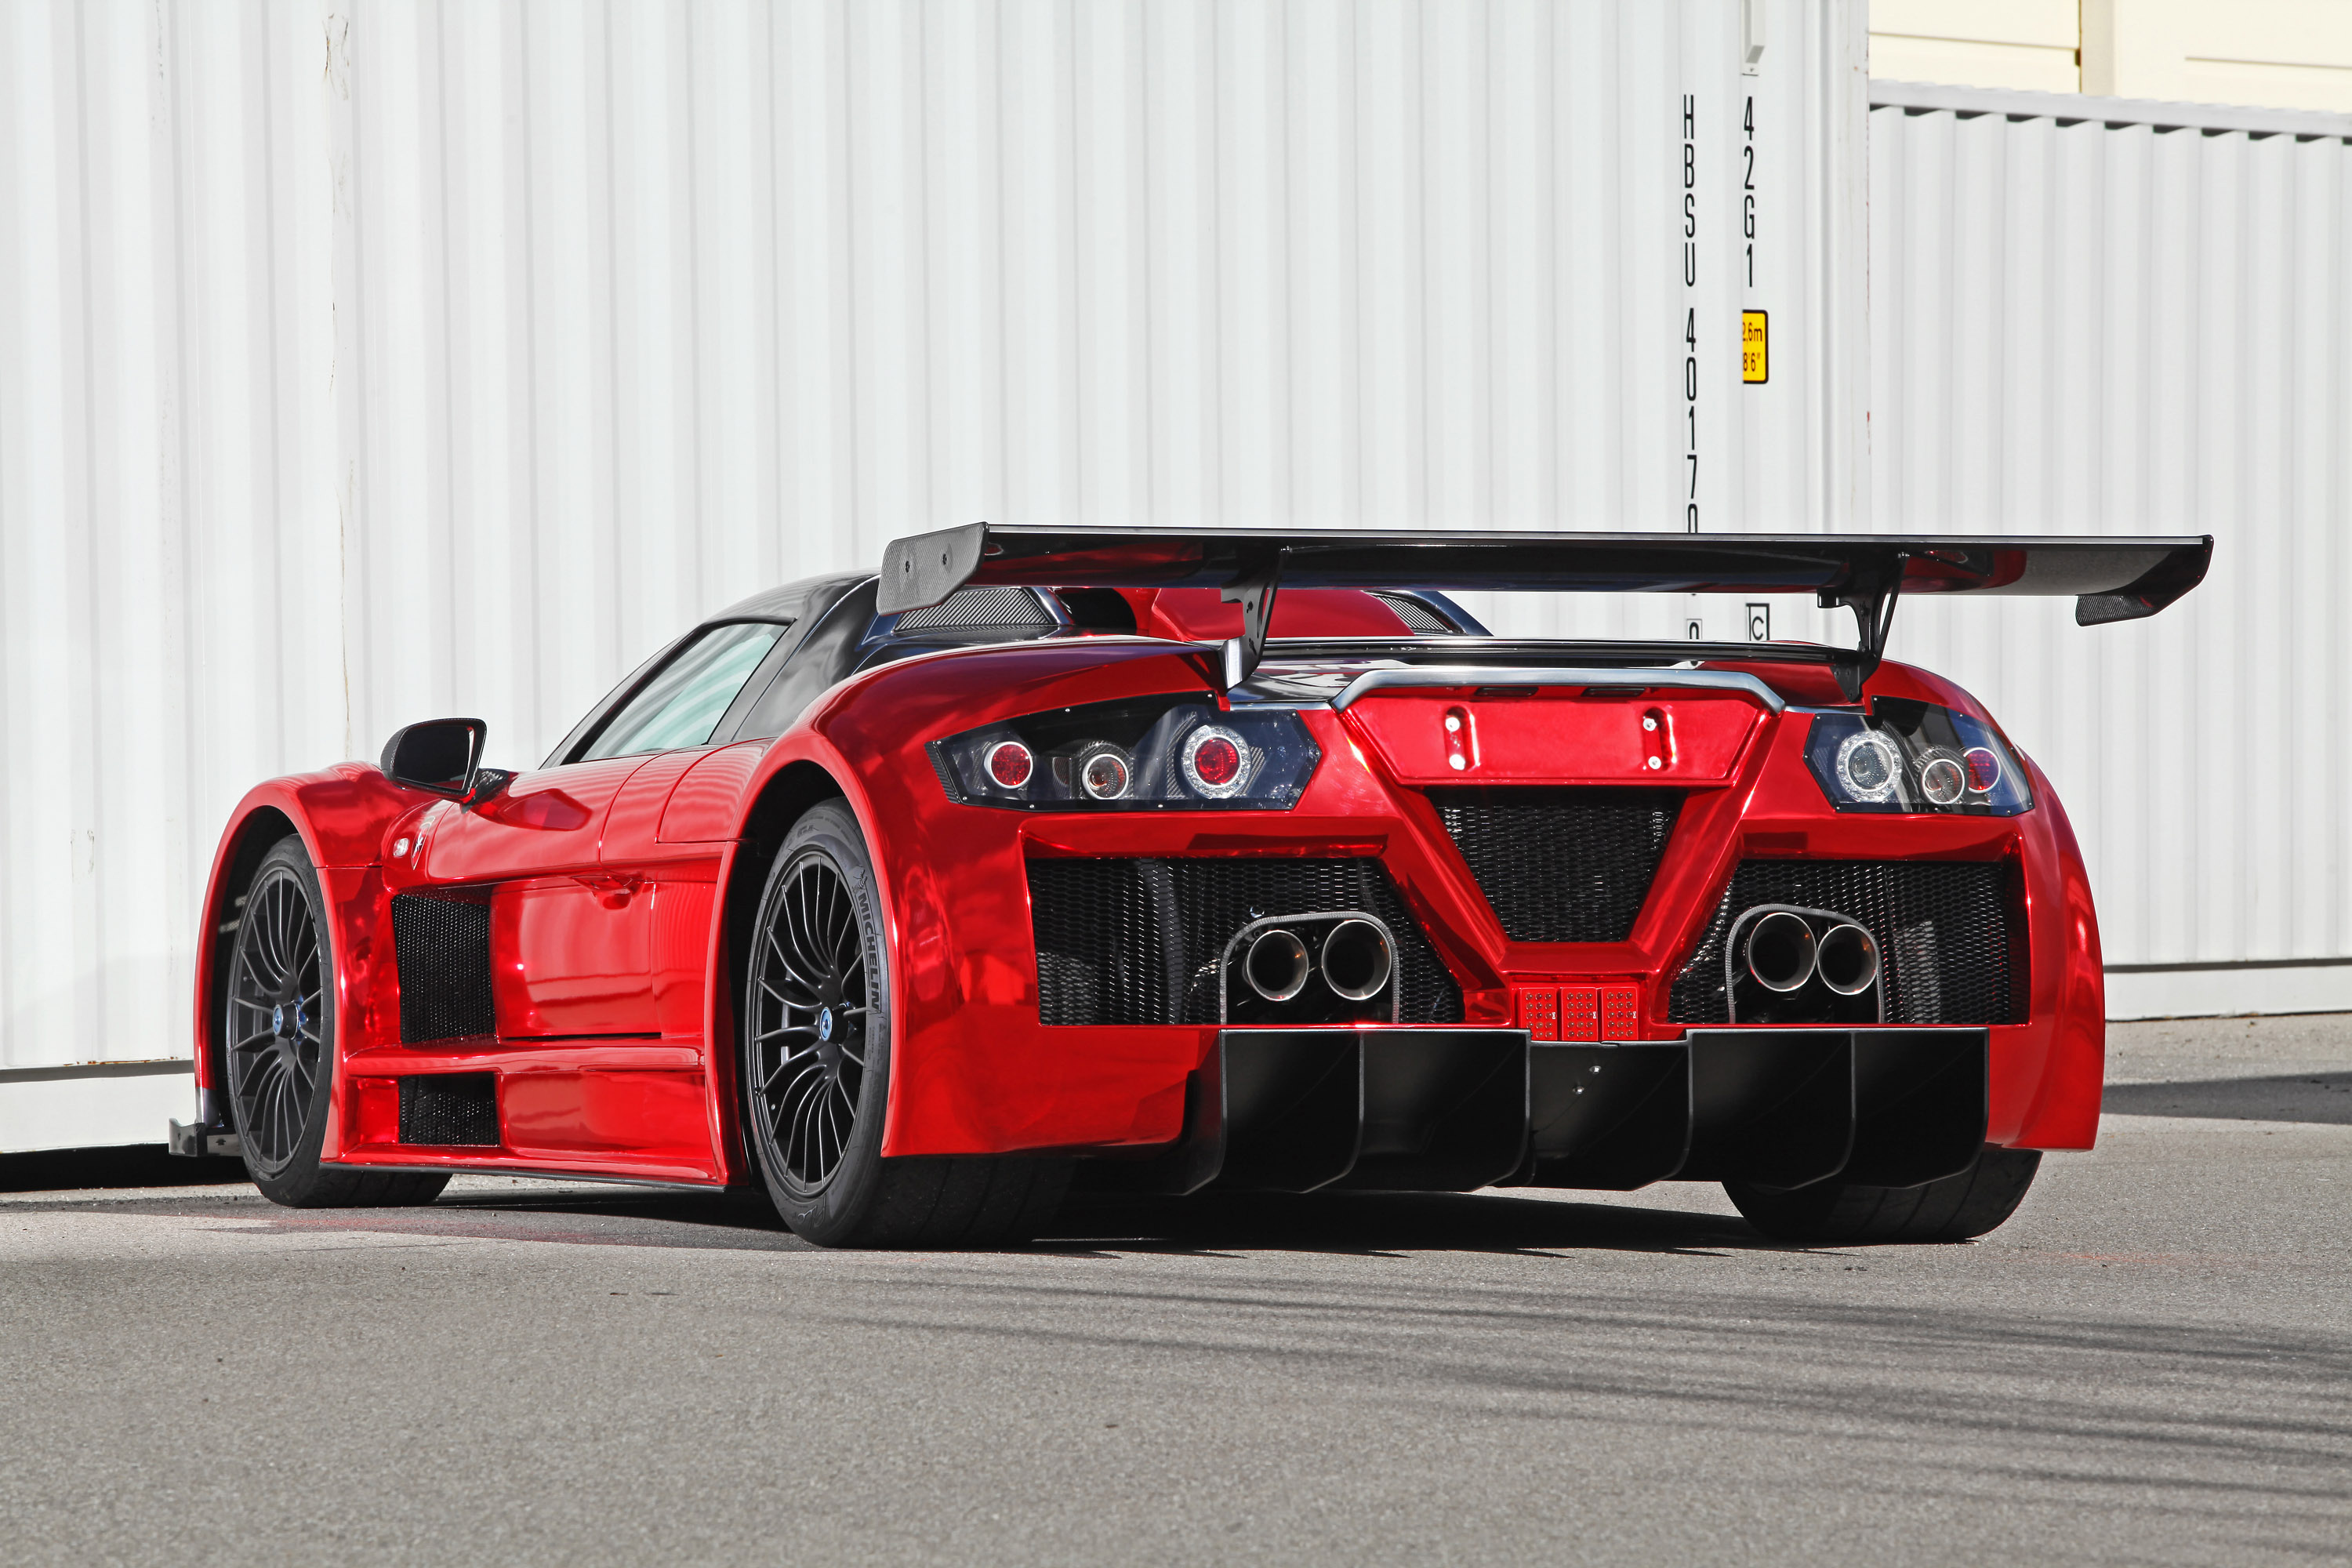 Download gumpert s for ile phone free gumpert hd pictures